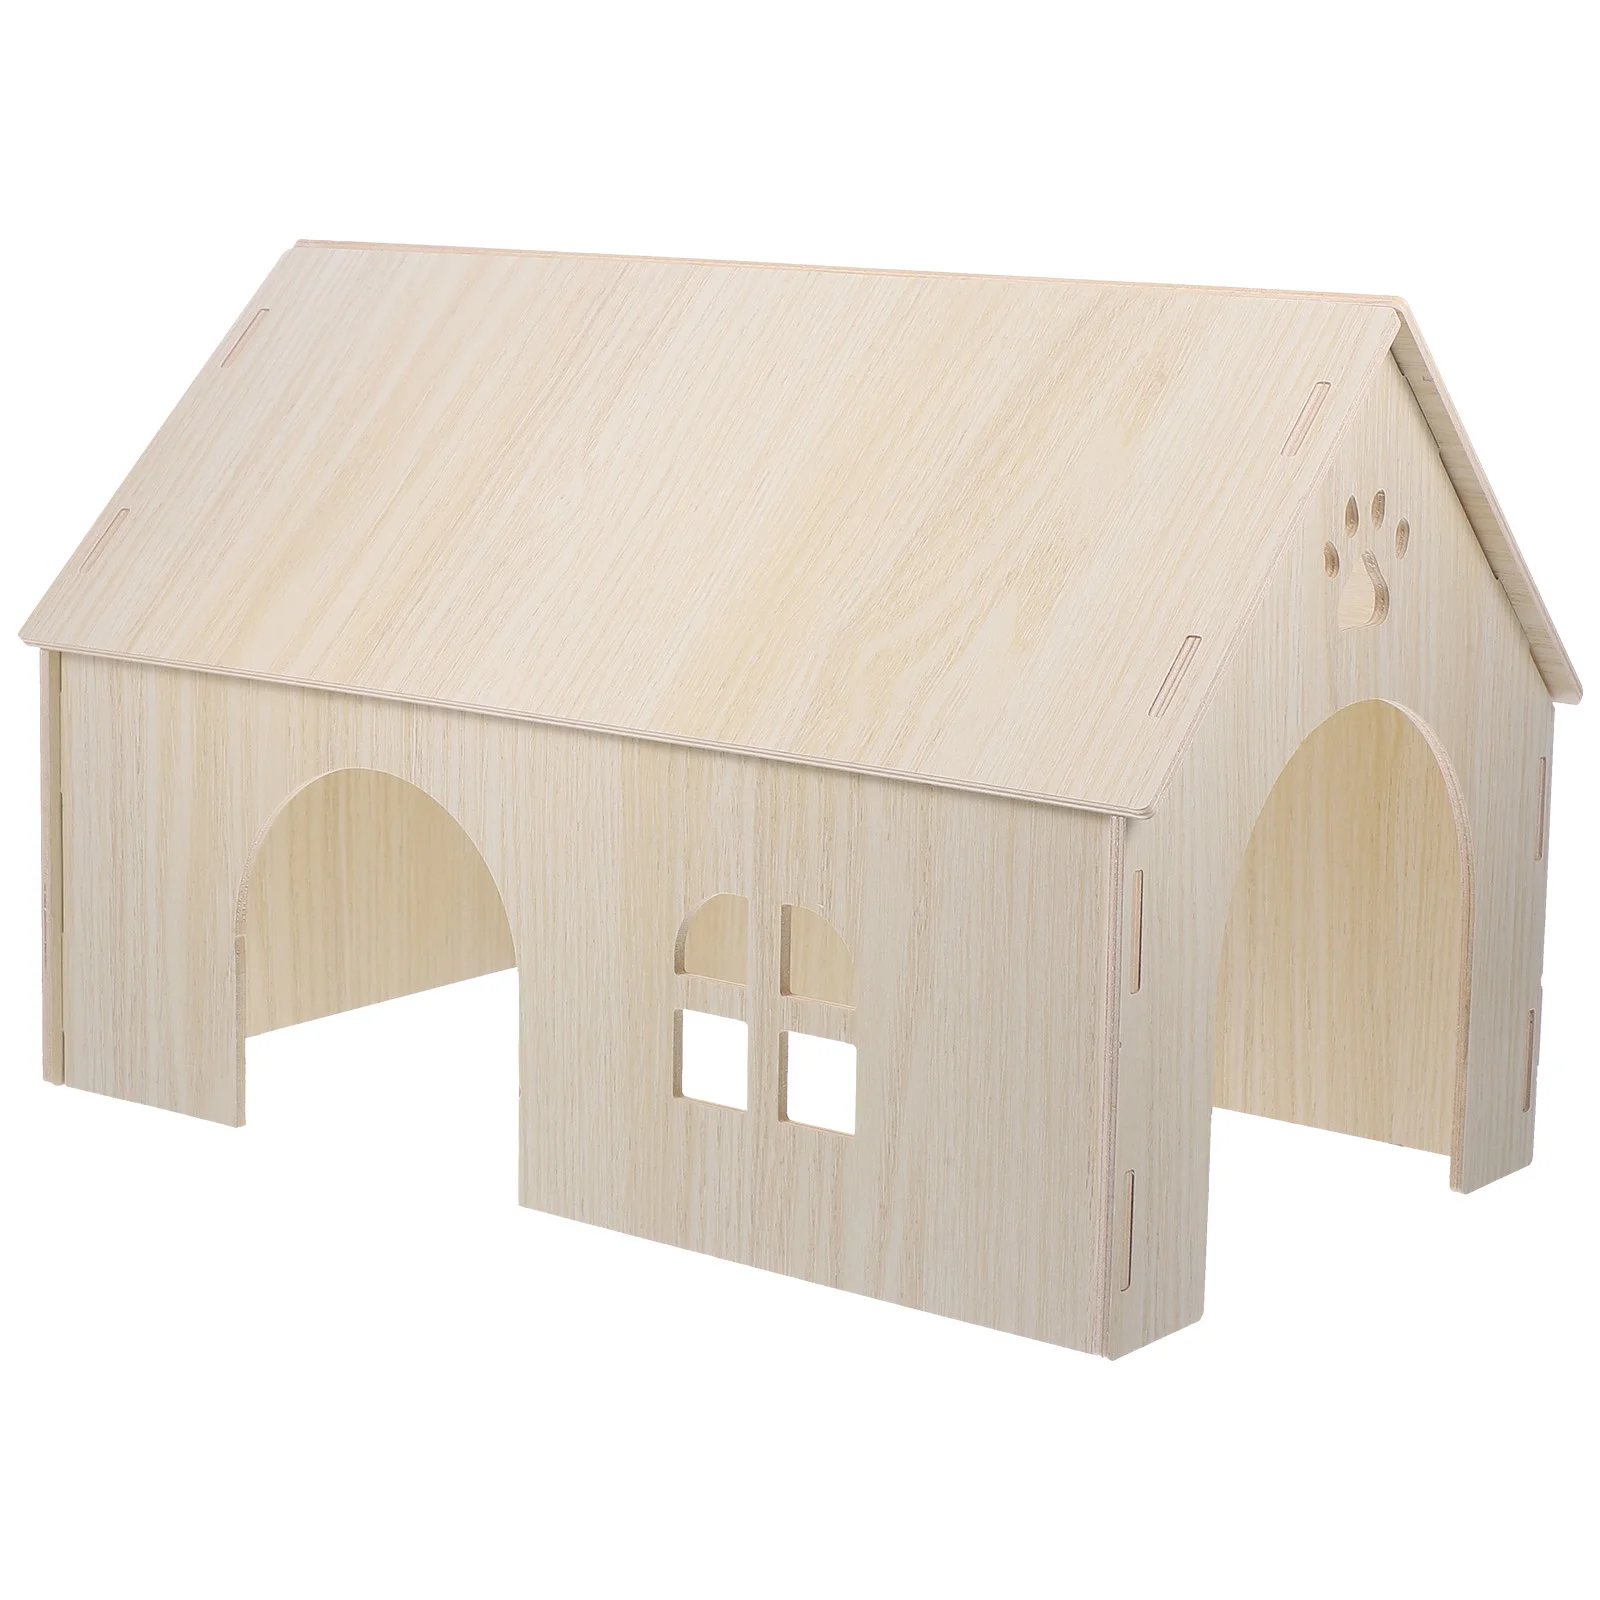 

Guinea Pig Maze Squirrel Wooden House Hamster Hideaway Toys Hideout Pets Exercising Home Rat Chinchilla Playground